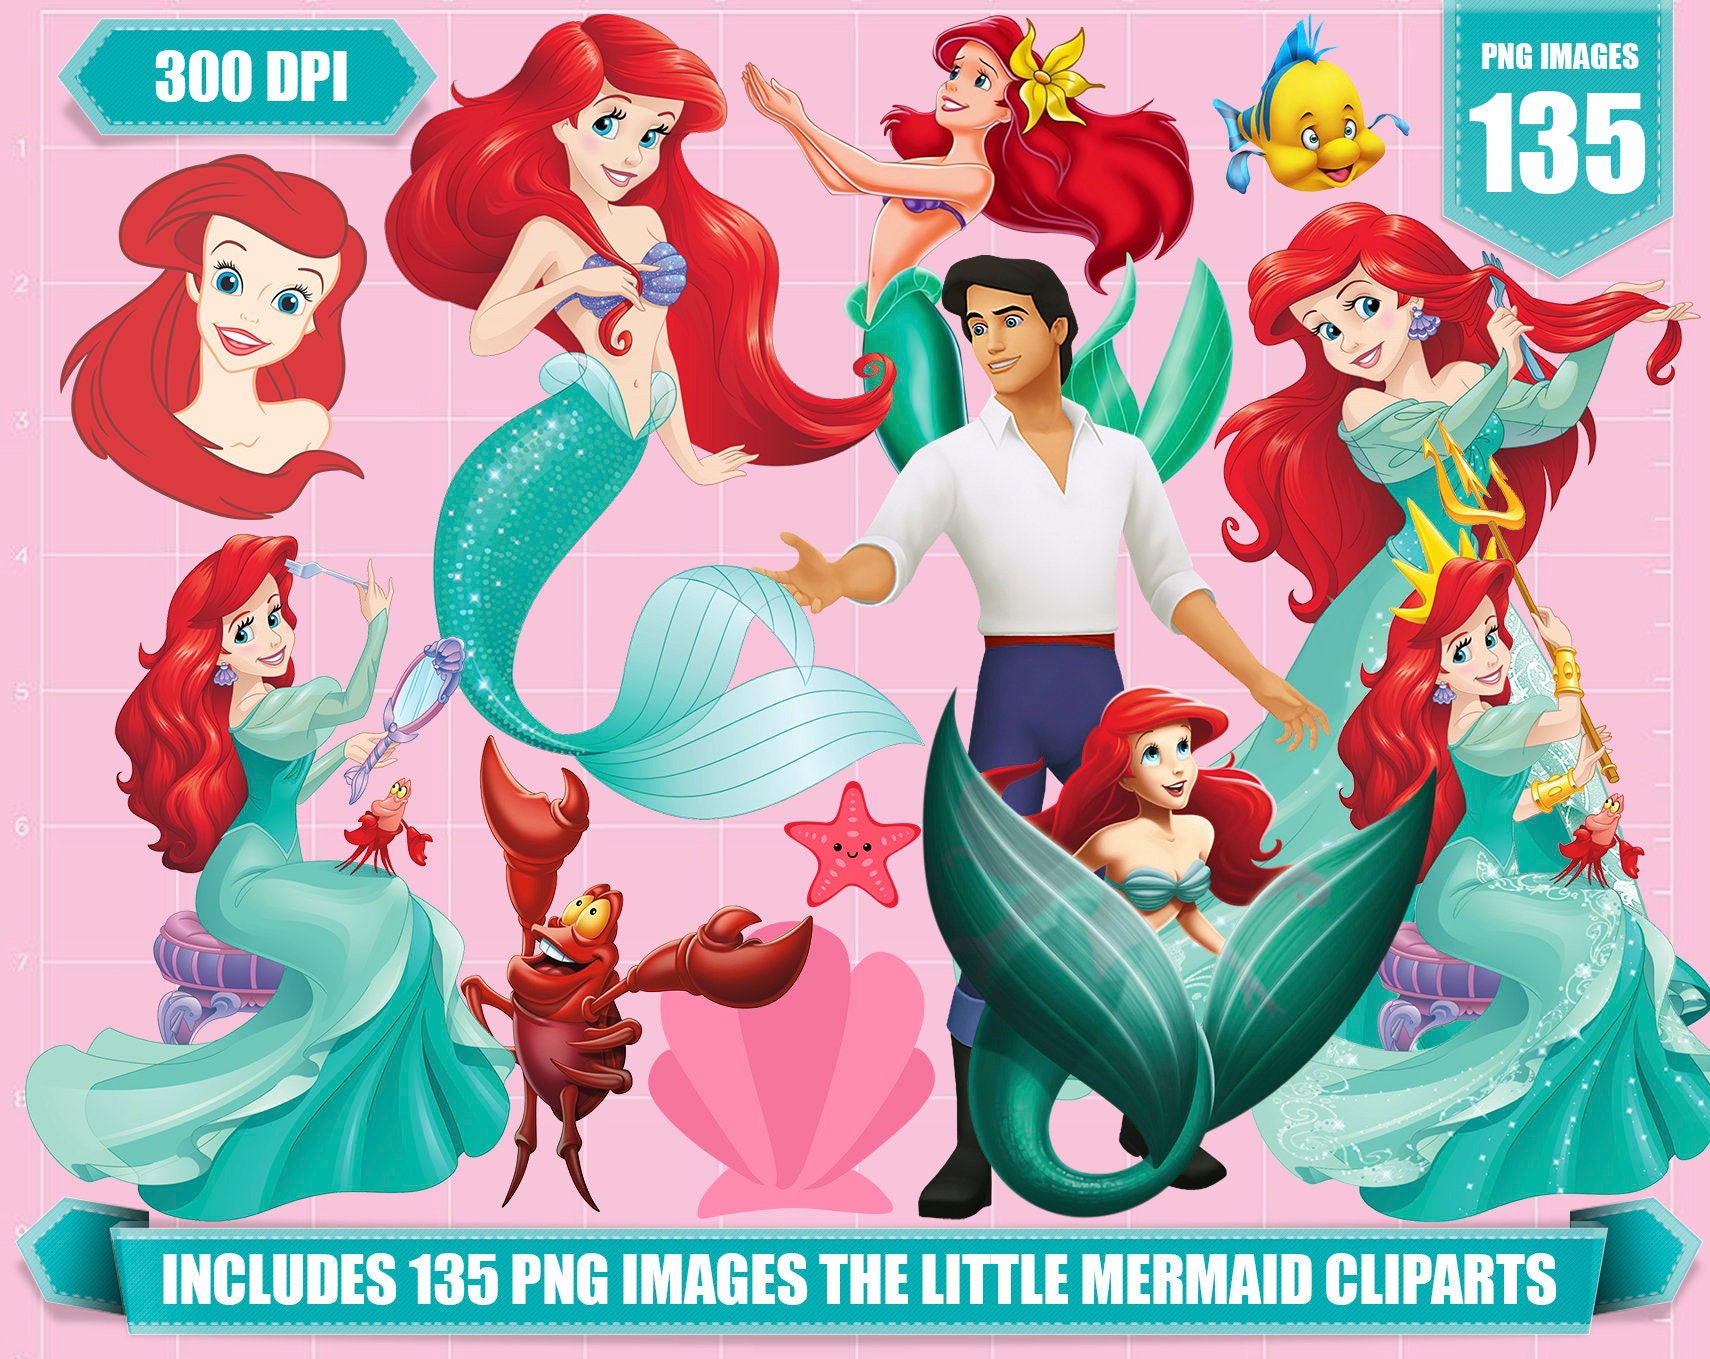 The Little Mermaid Clipart 135 Png Images Printable the Etsy Canada